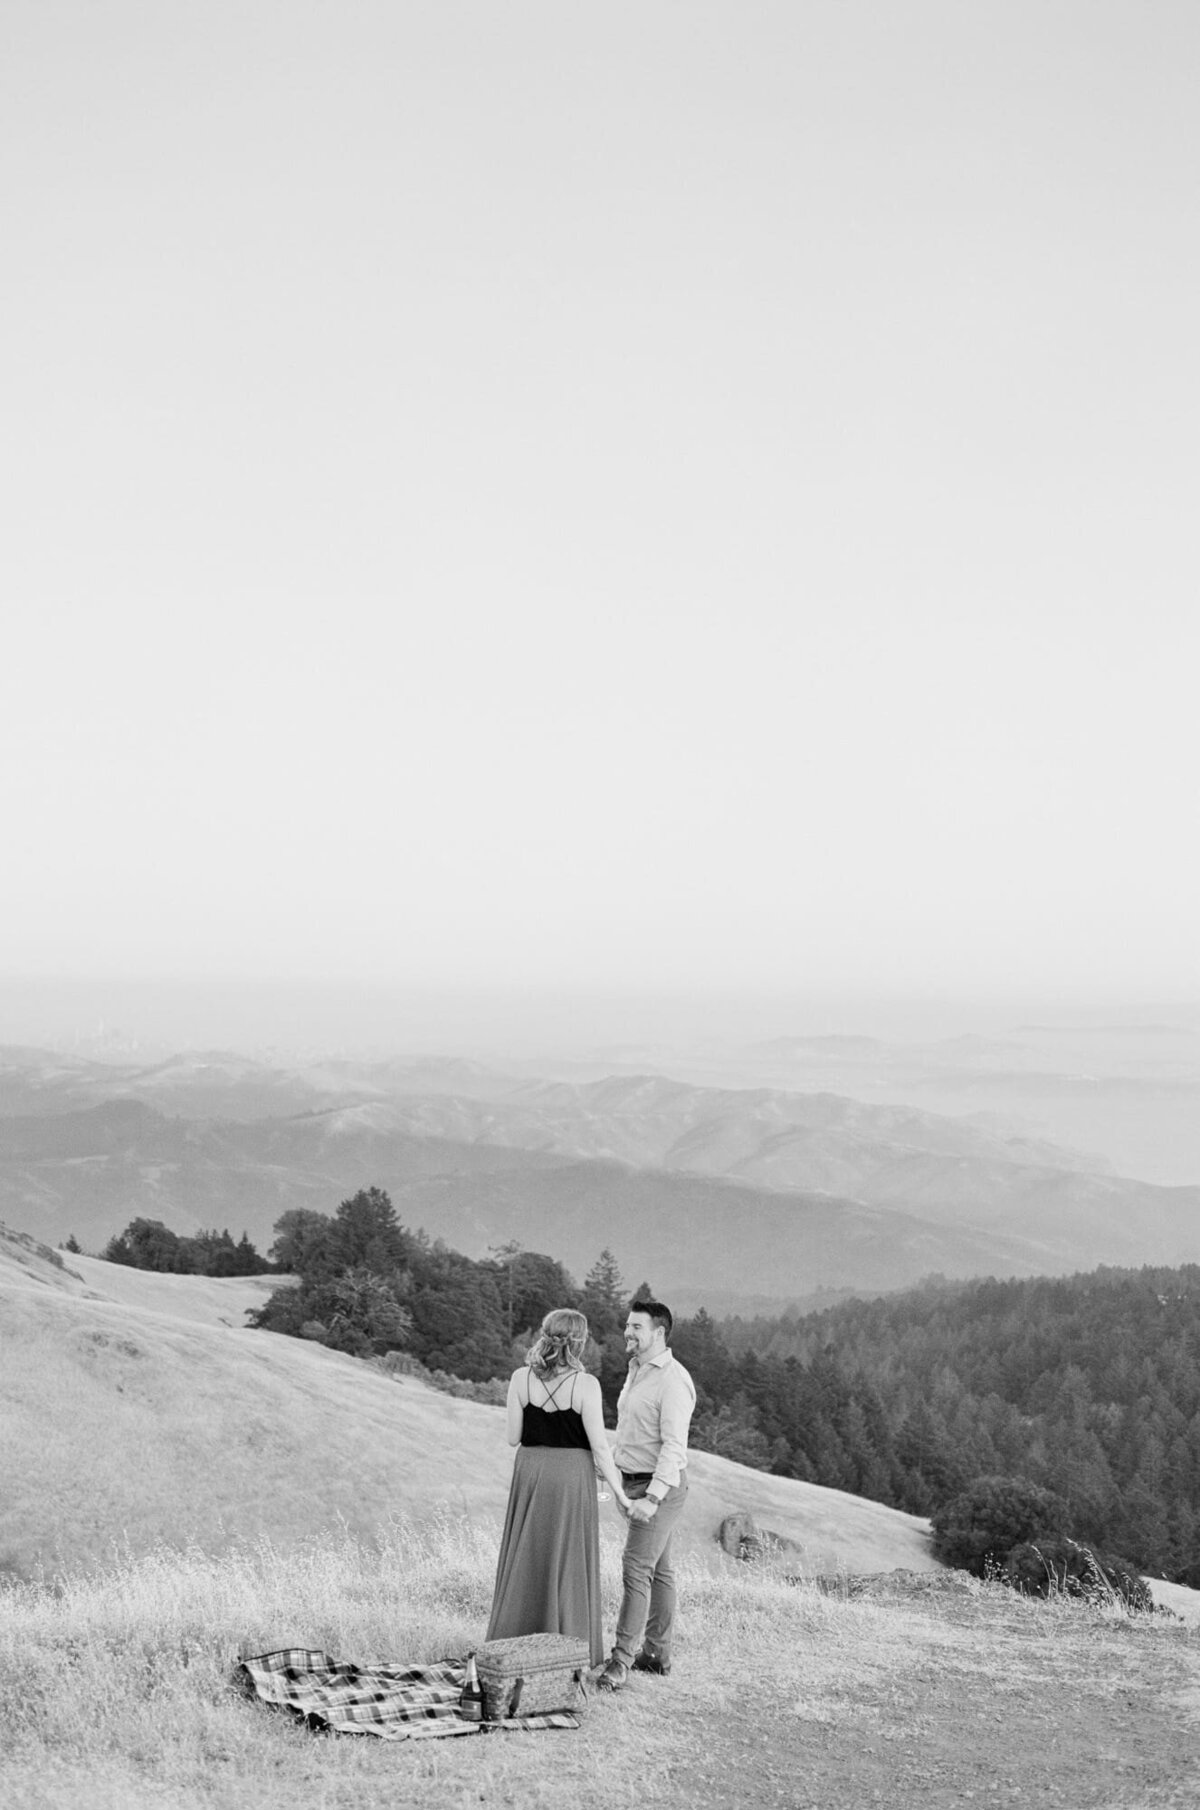 Adorable young couple enjoy a moment together with a picnic basket and picnic rug at a hilltop in front of hill ranges that seem to go on forever in  the background.